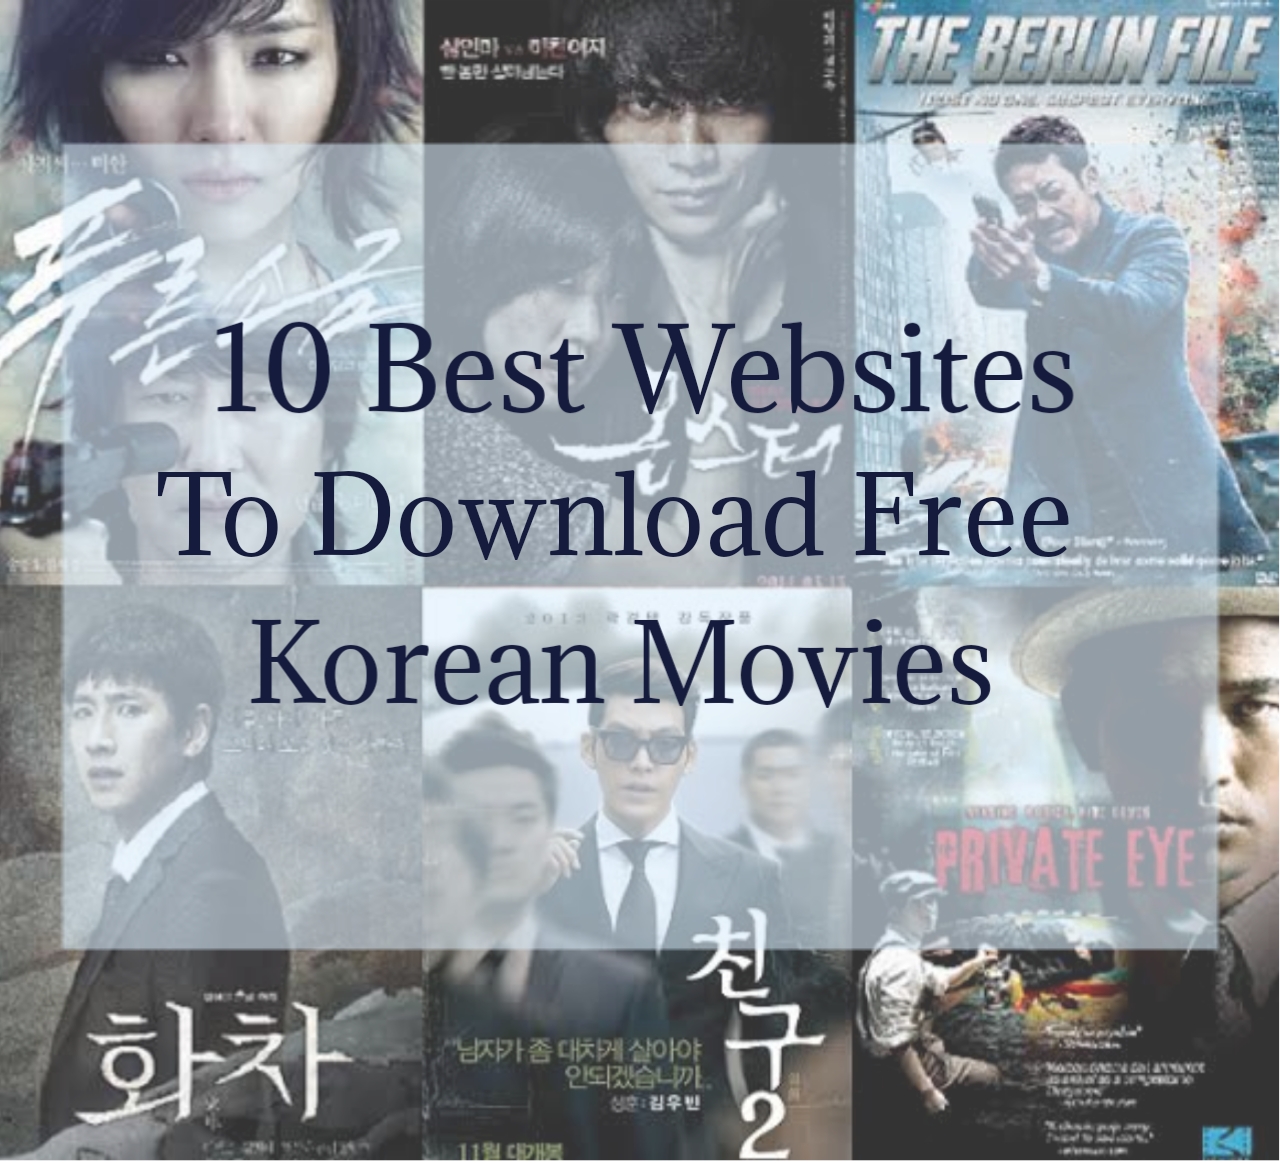 websites to download korean movies for free